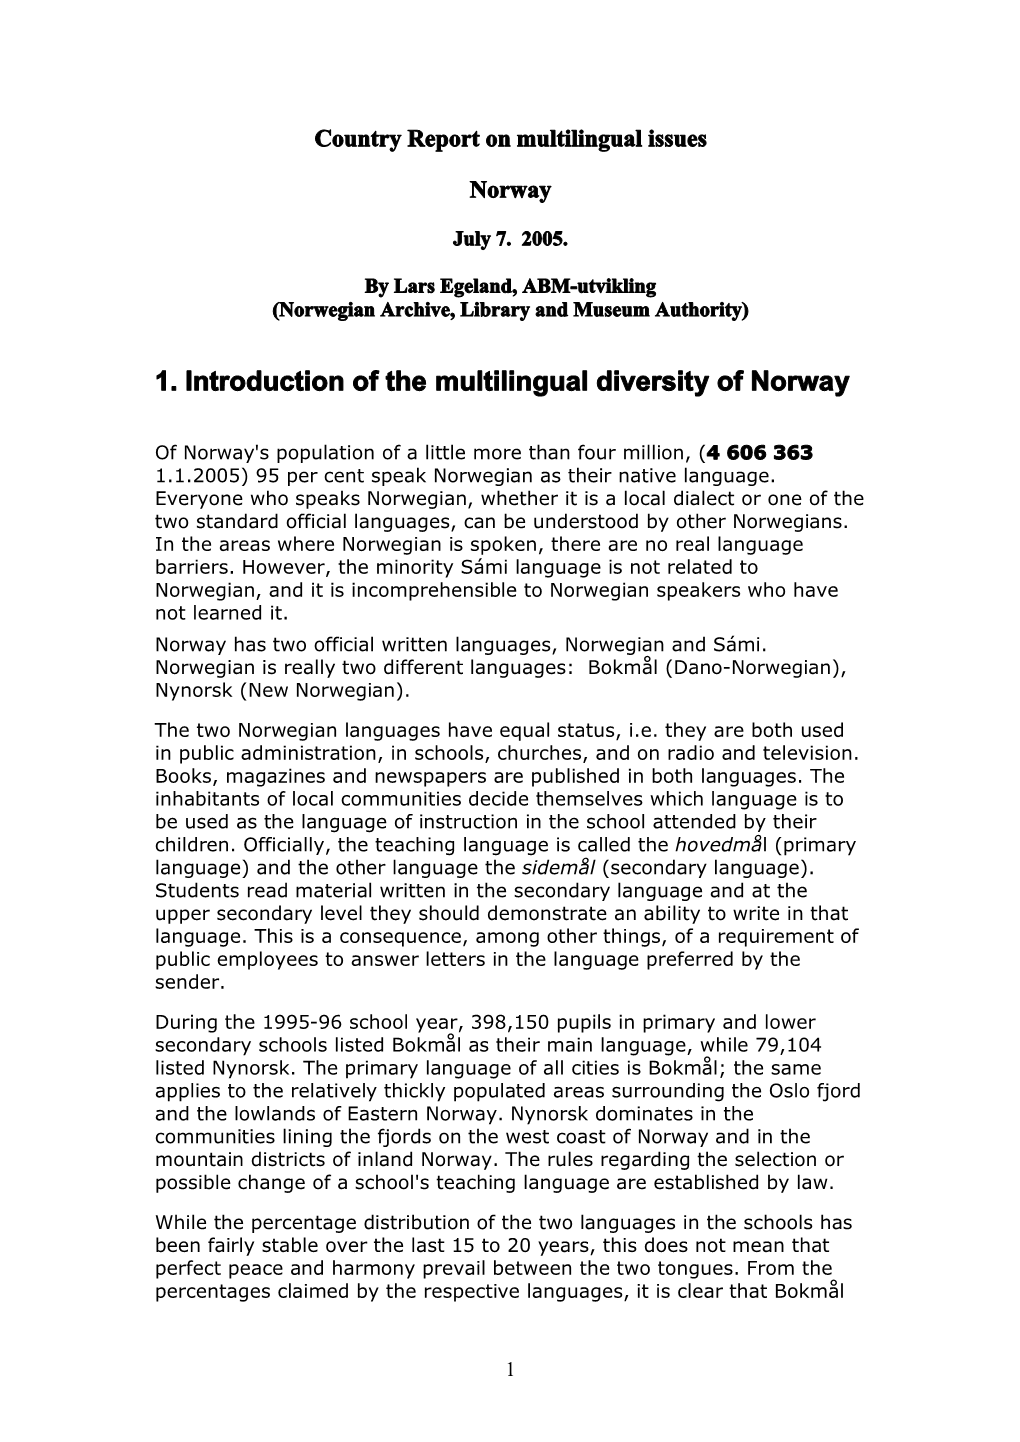 1. Introduction of the Multilingual Diversity of Norway